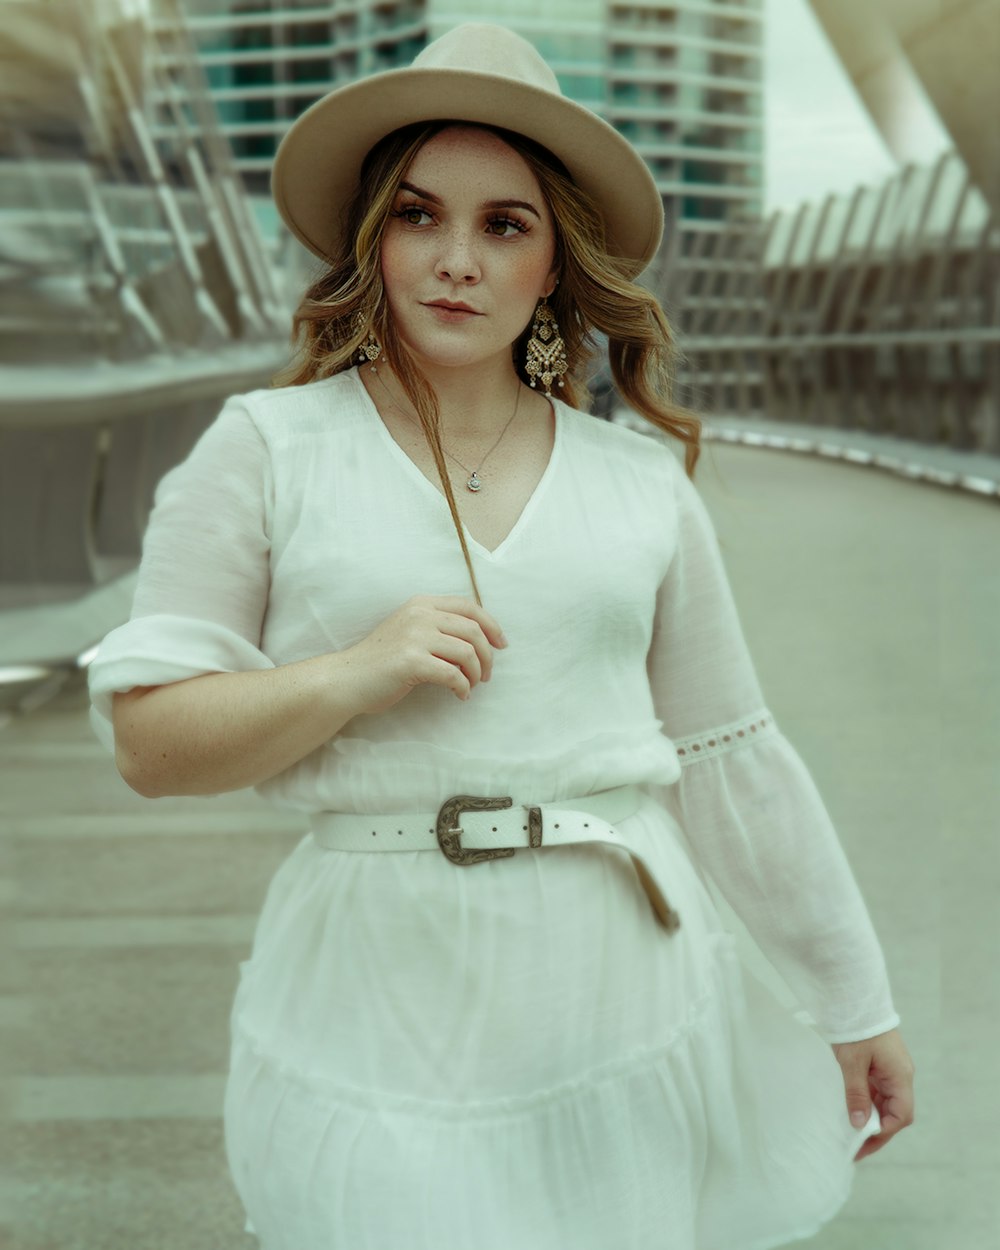 woman in white long sleeve shirt and white skirt wearing brown hat